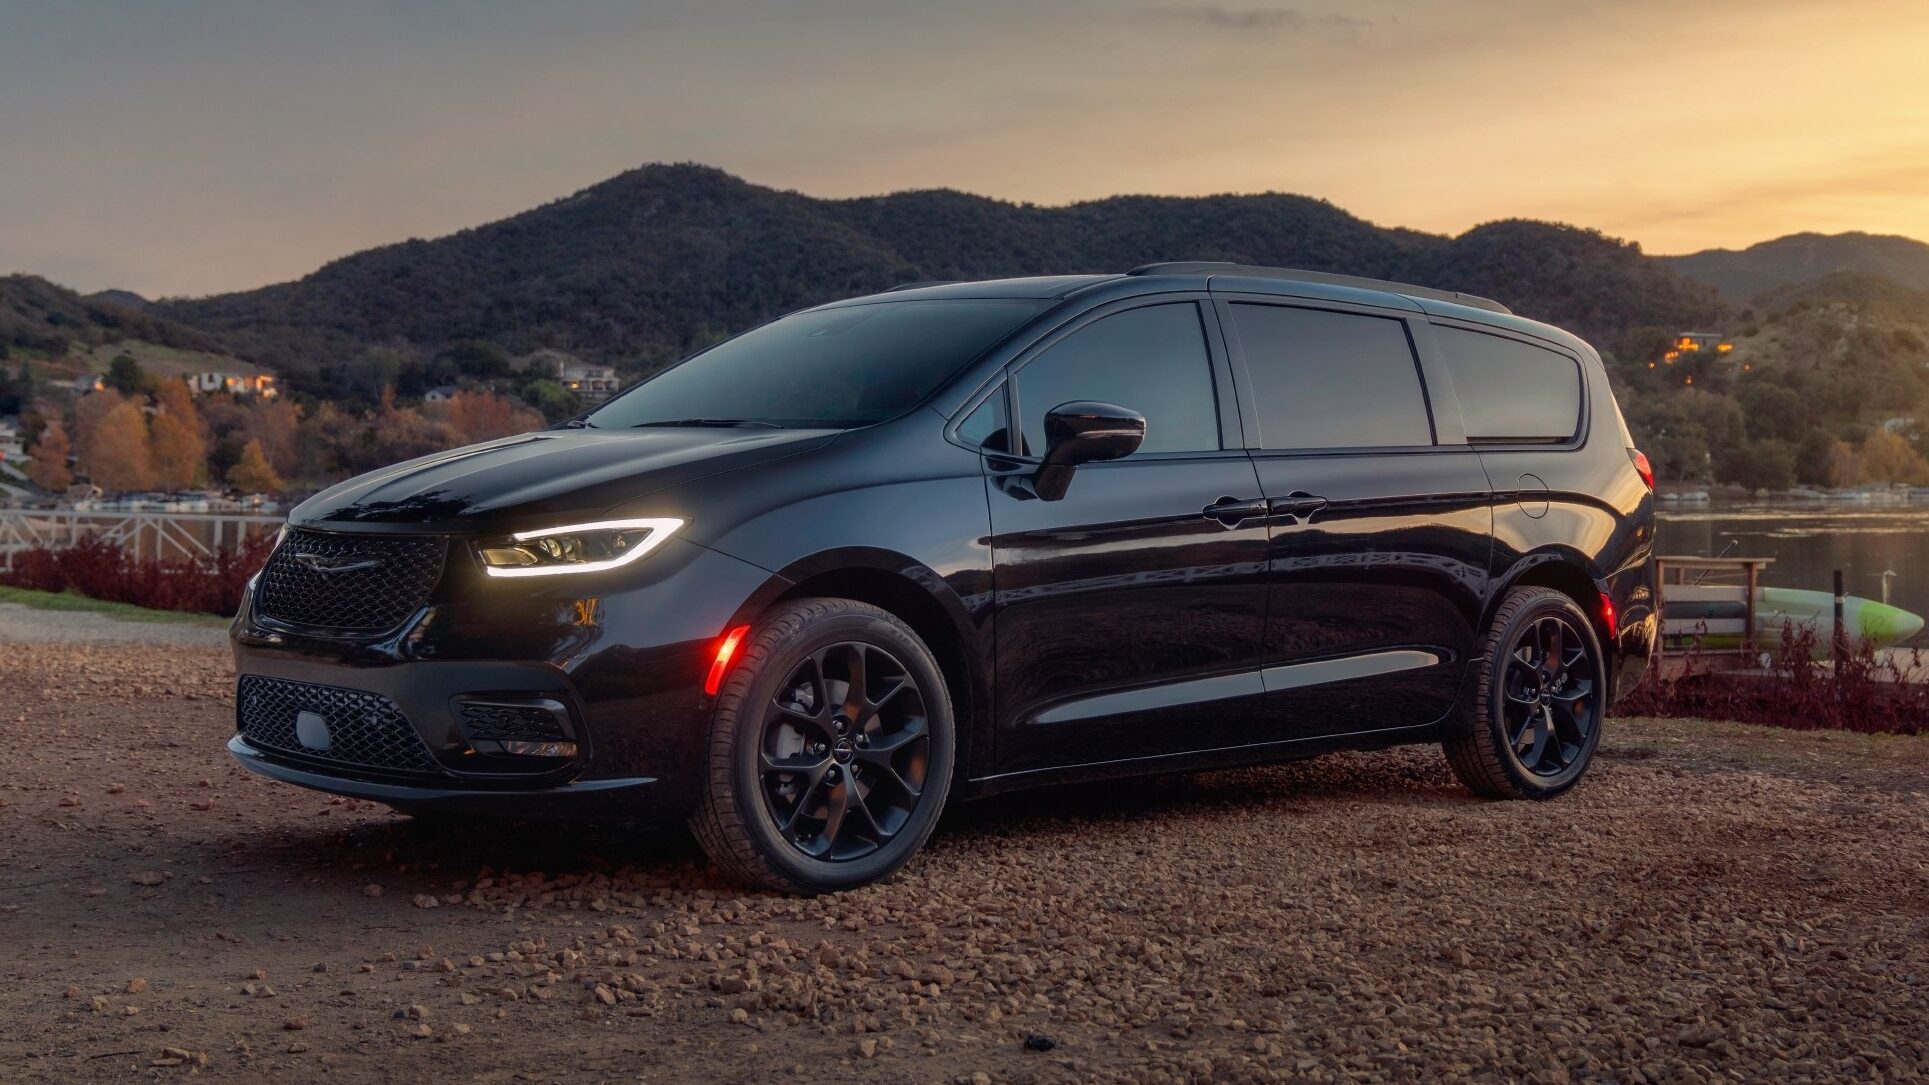 Is The 2021 Chrysler Pacifica Limited The Best Family